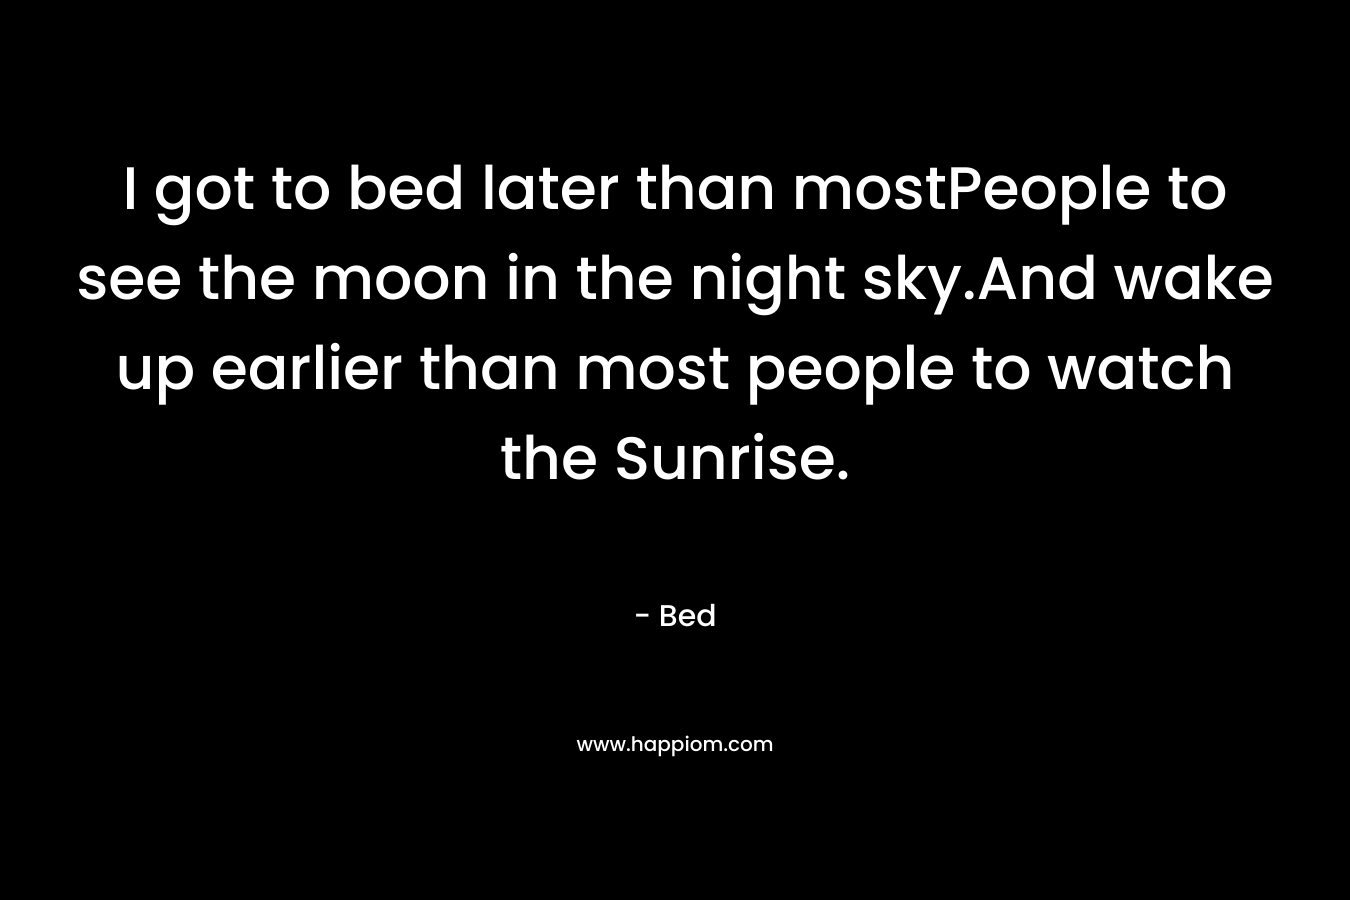 I got to bed later than mostPeople to see the moon in the night sky.And wake up earlier than most people to watch the Sunrise.